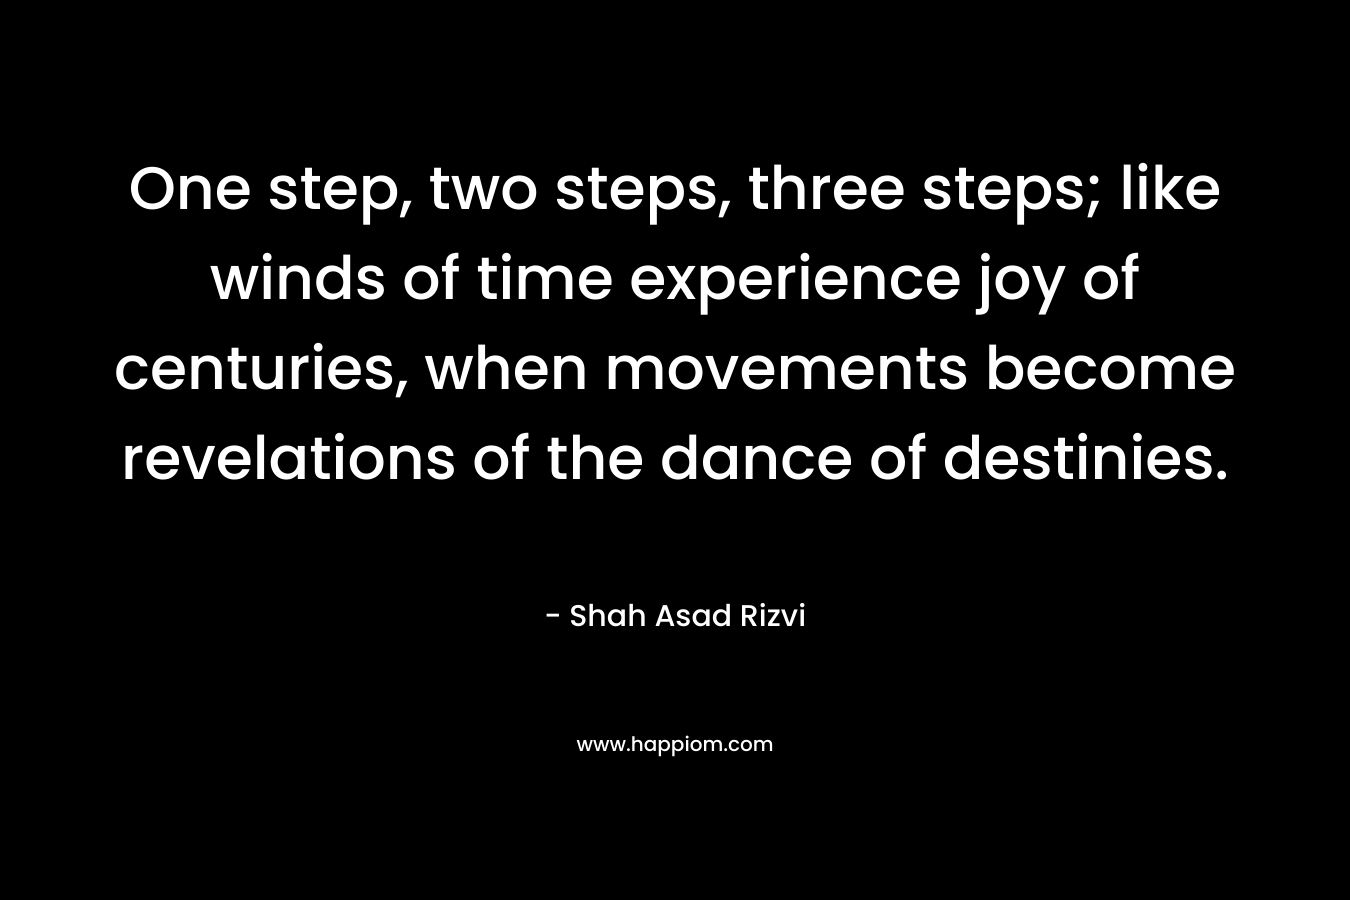 One step, two steps, three steps; like winds of time experience joy of centuries, when movements become revelations of the dance of destinies. – Shah Asad Rizvi